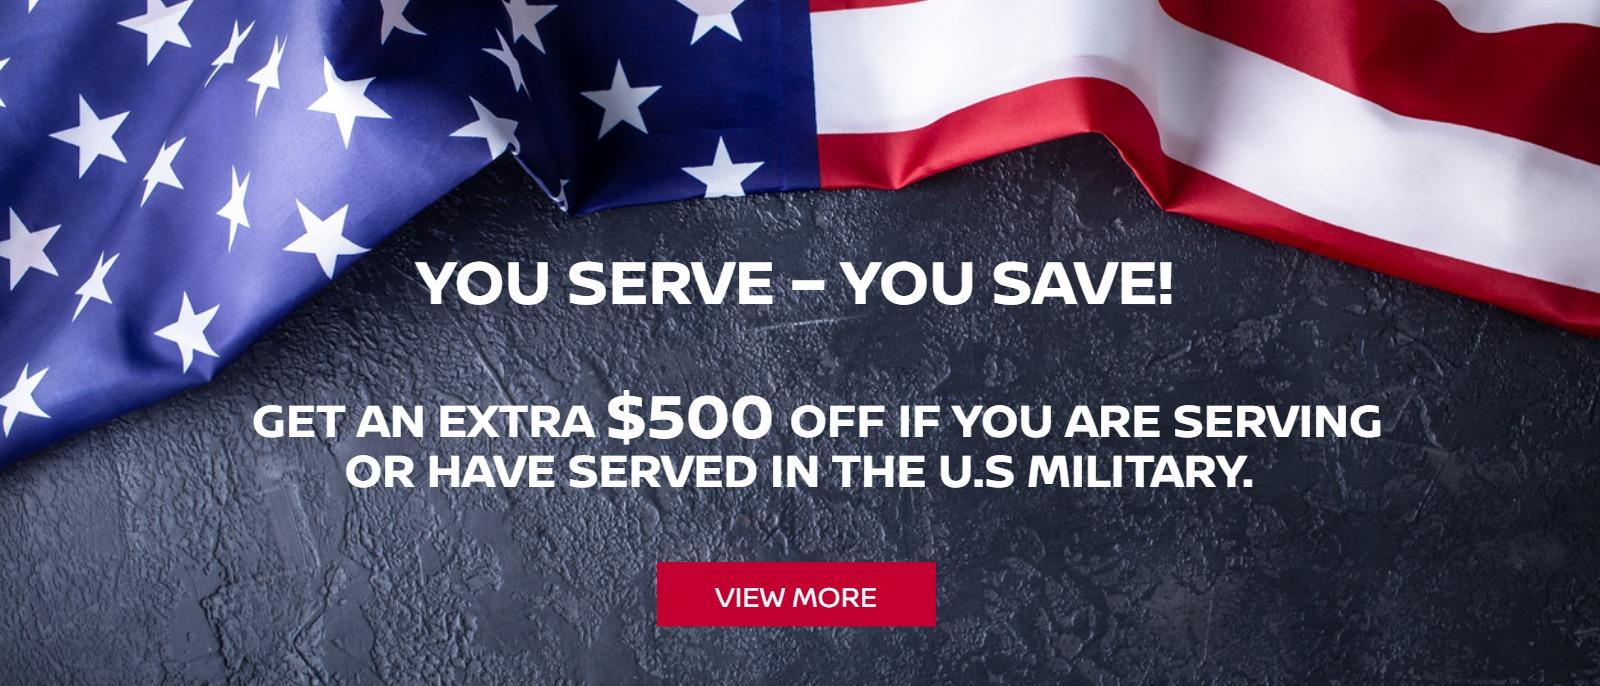 You Serve – You Save! Get an extra $500 off if you are serving or have served in the U.S military.